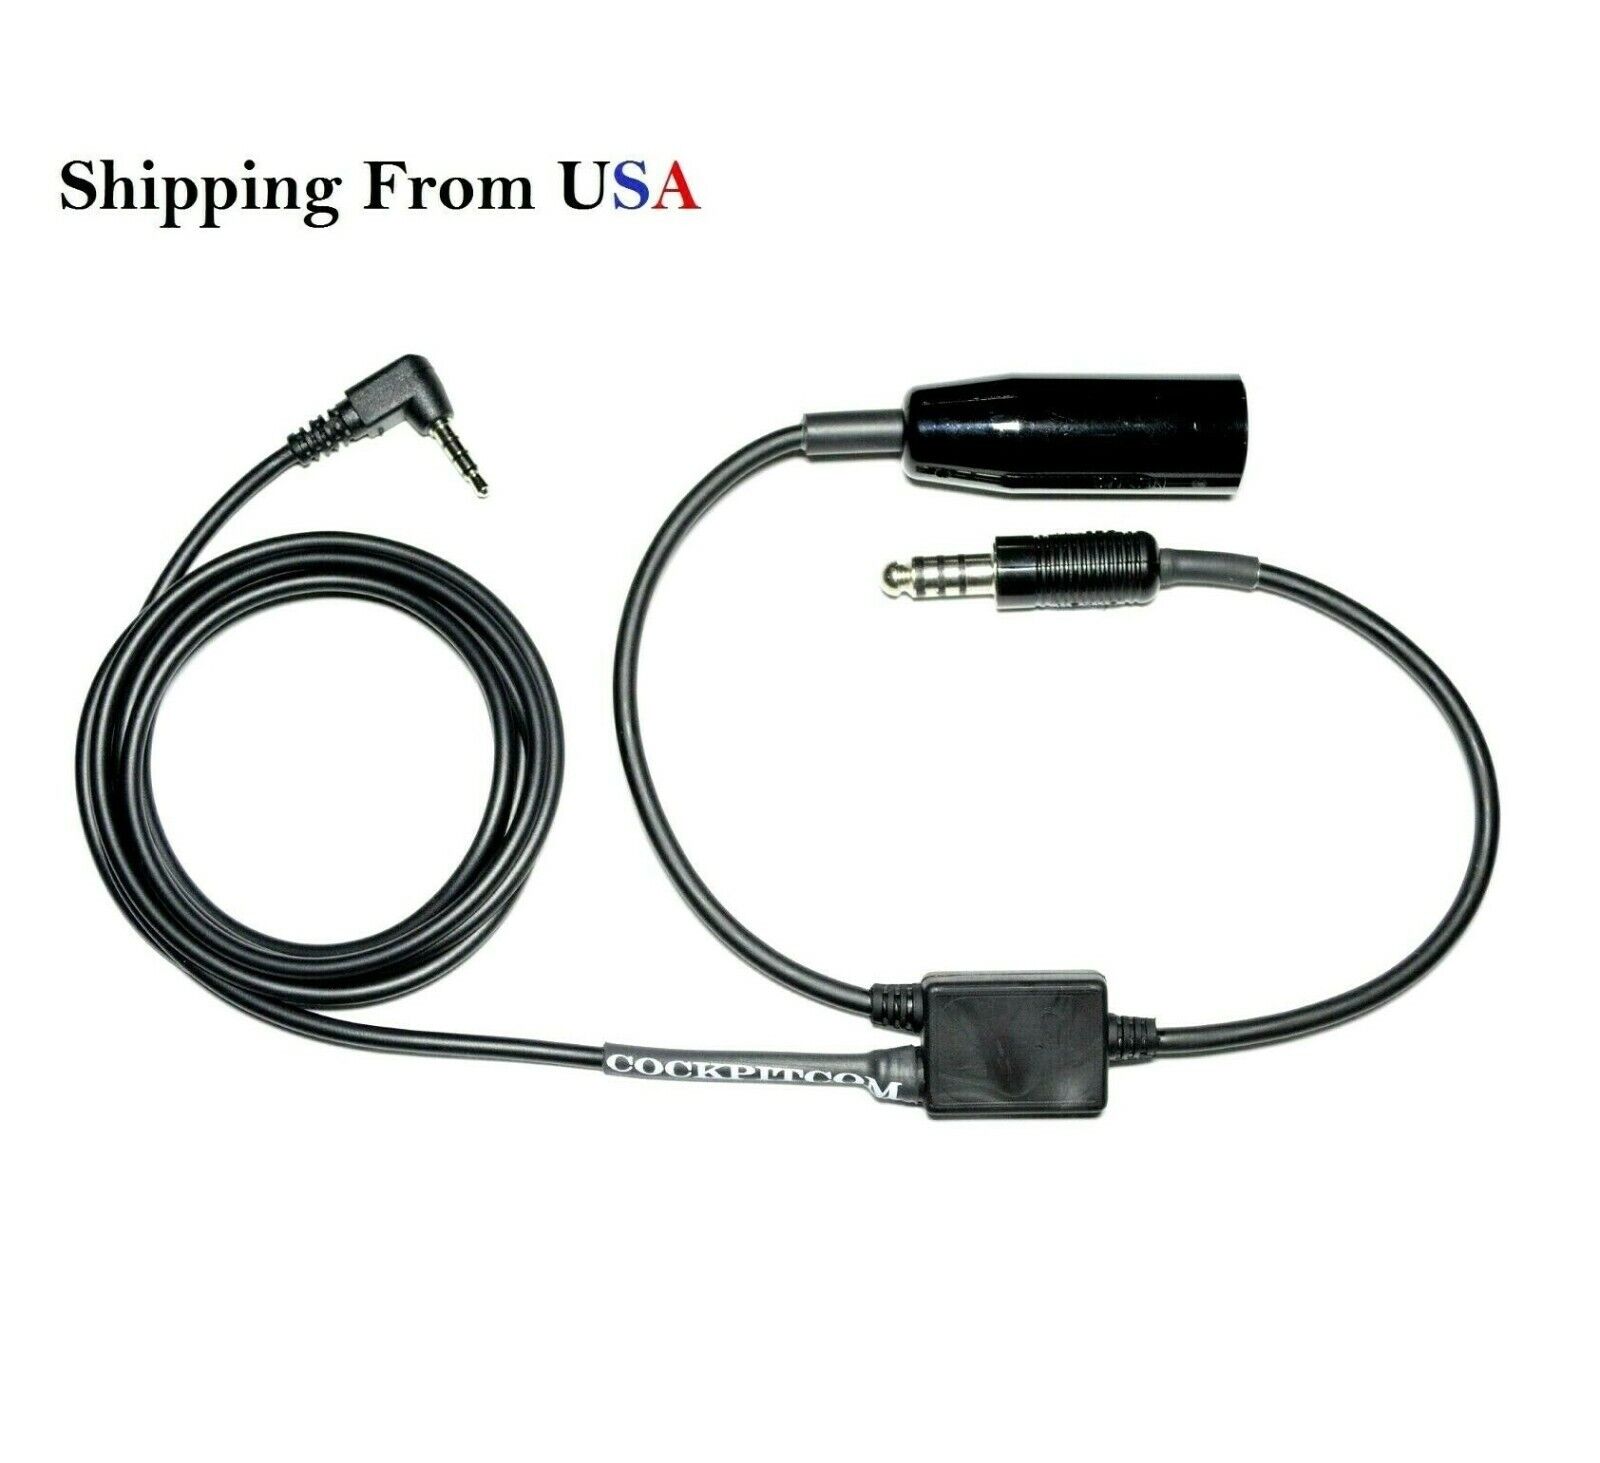 IPHONE/ SMARTPHONE RECORDING ADAPTER FOR HELICOPTER, ATC COCKPIT AUDIO RECORDER